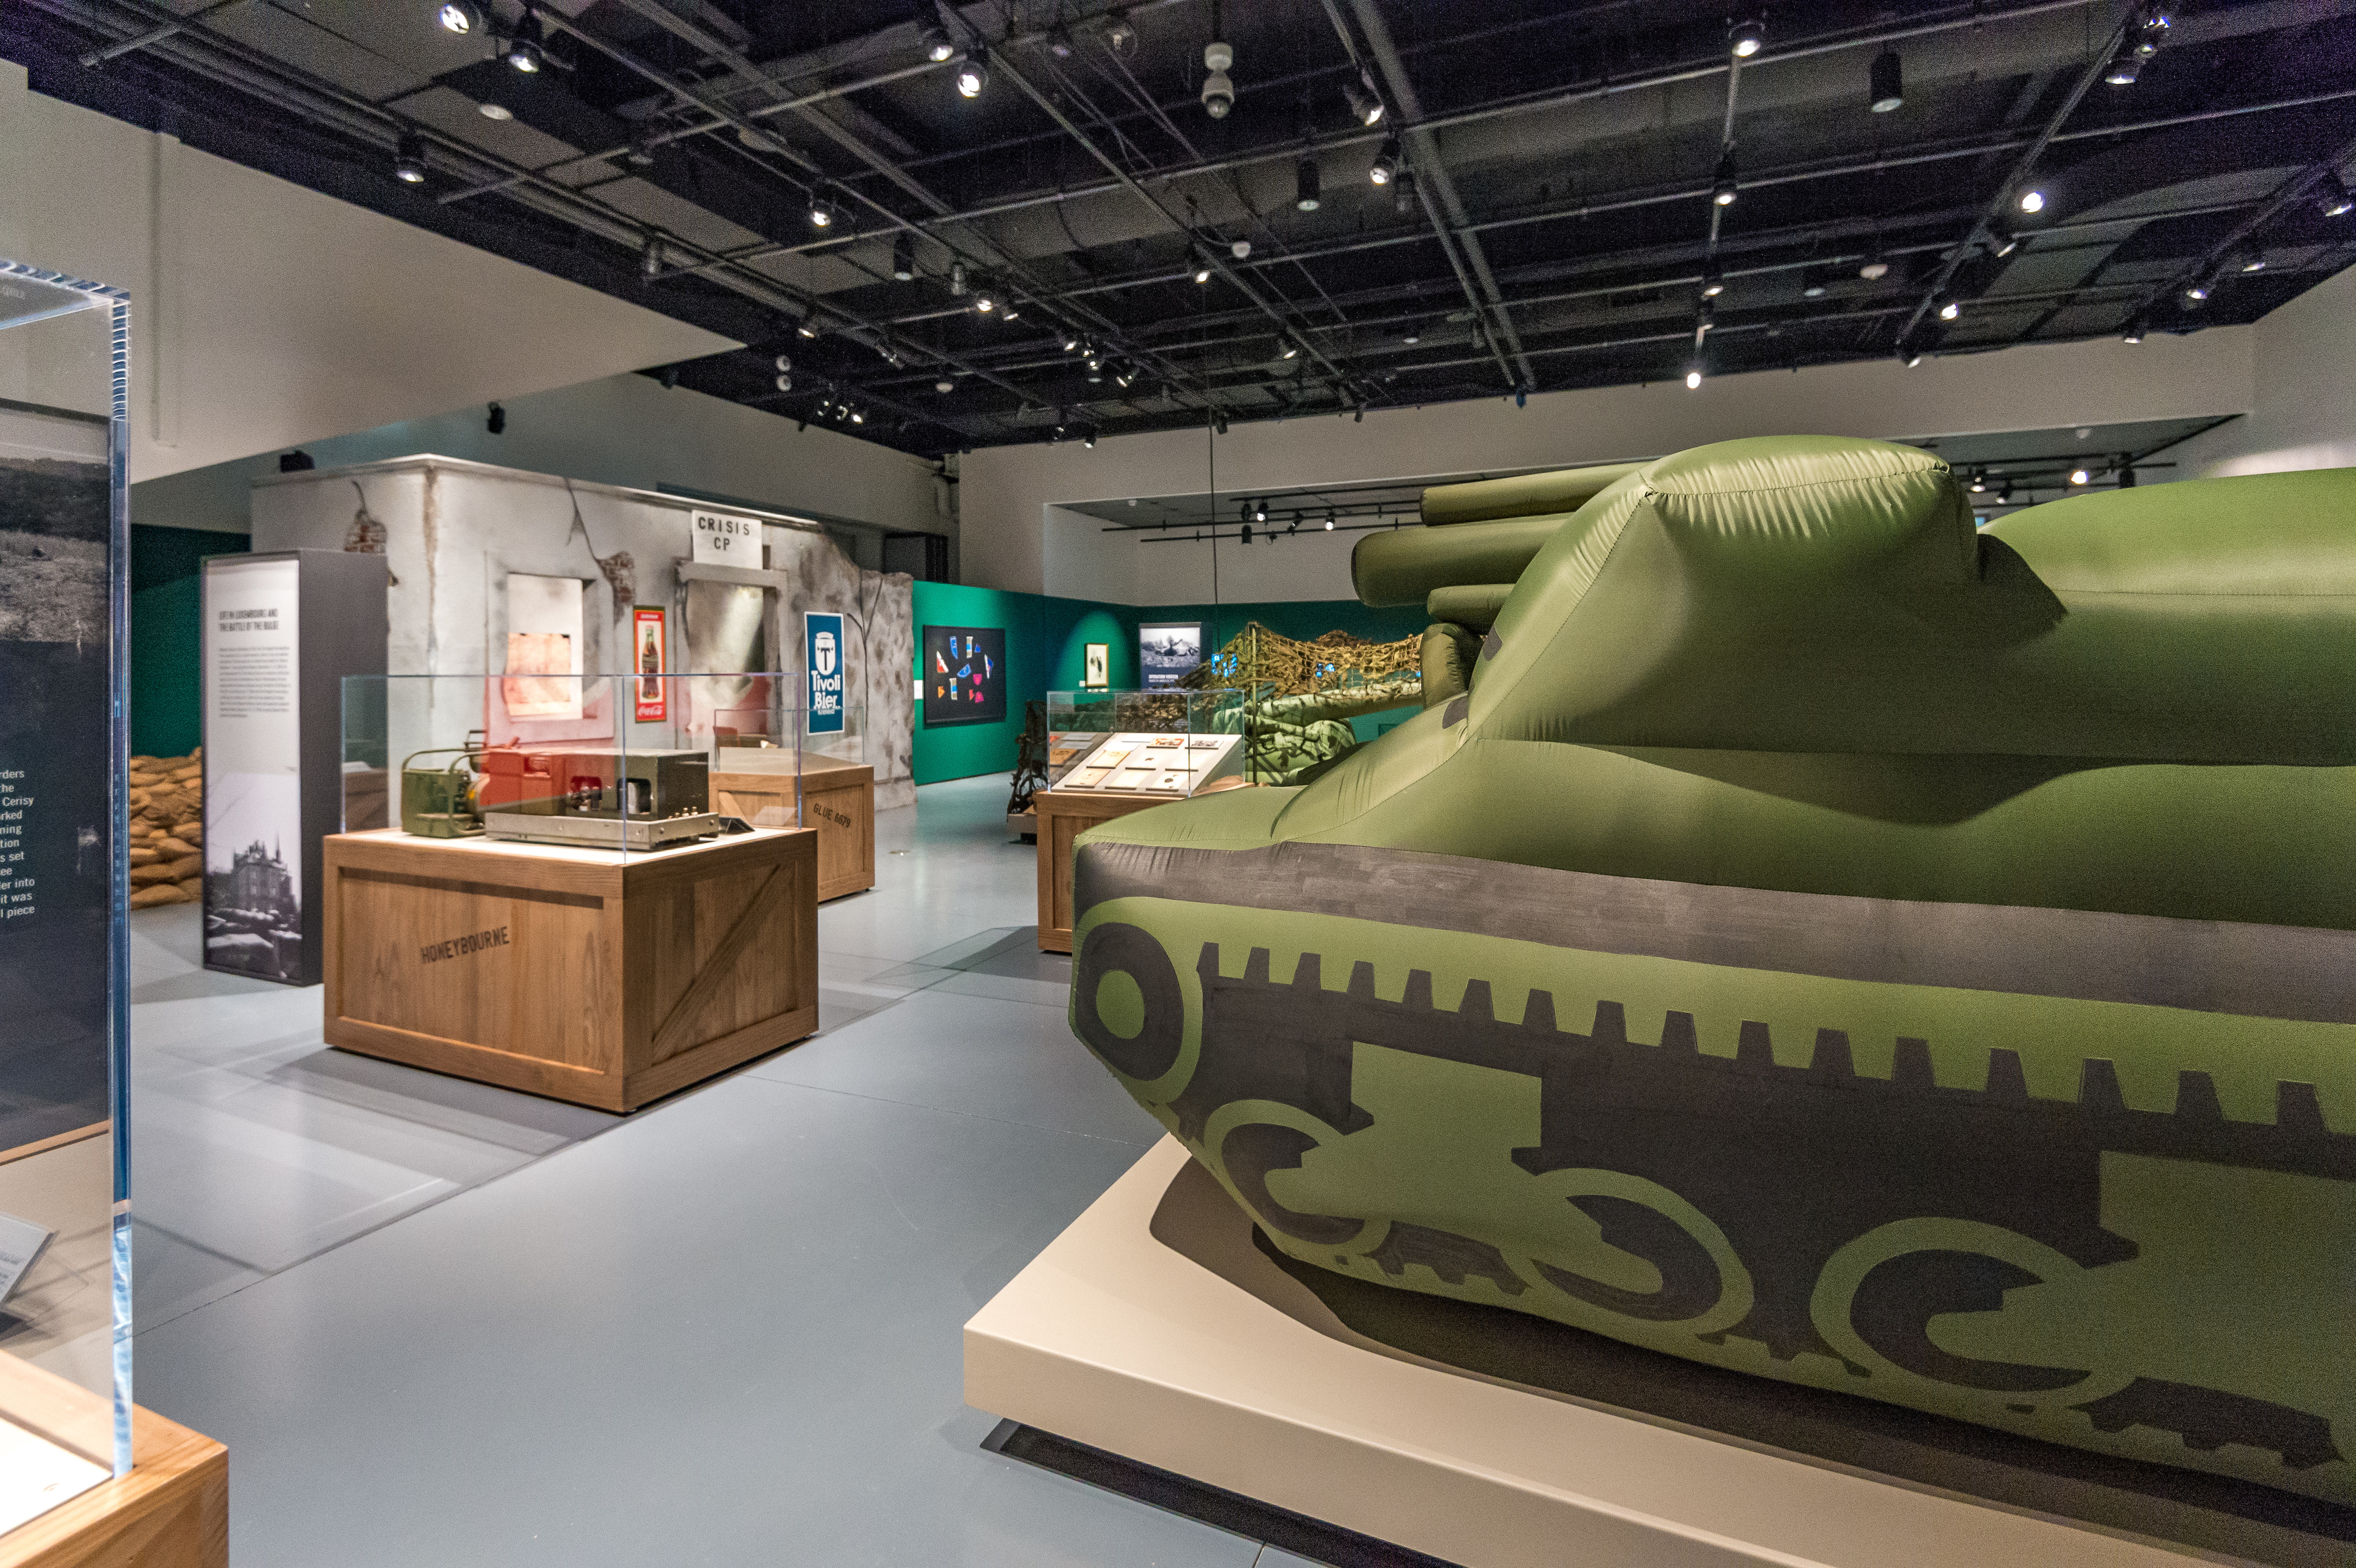 The National WWII Museum’s traveling exhibit Ghost Army